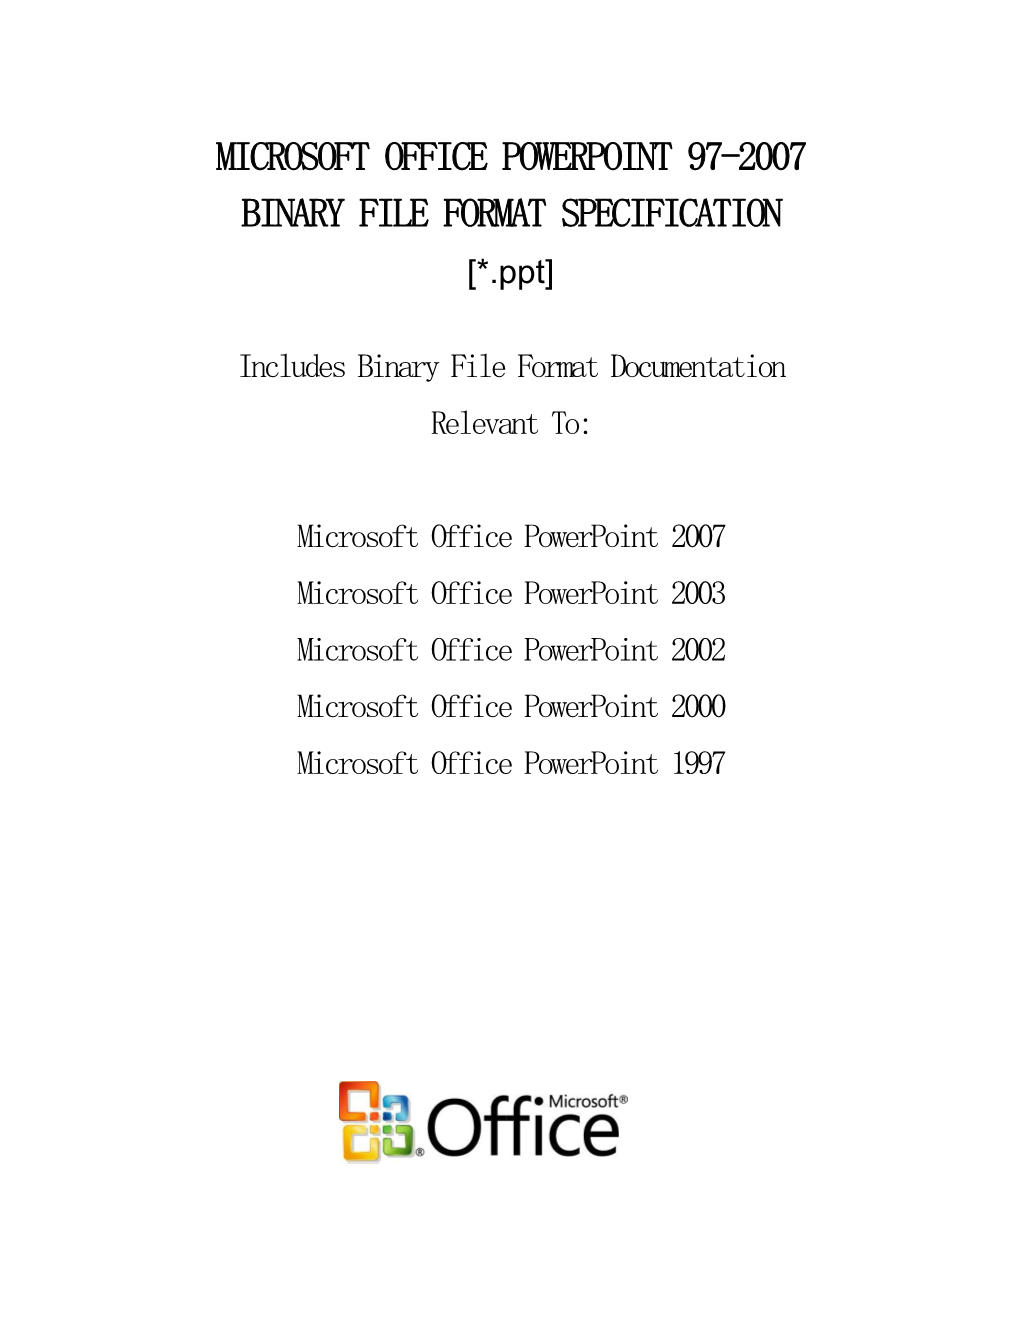 Microsoft Office Powerpoint 97-2007 Binary File Format Specification (As